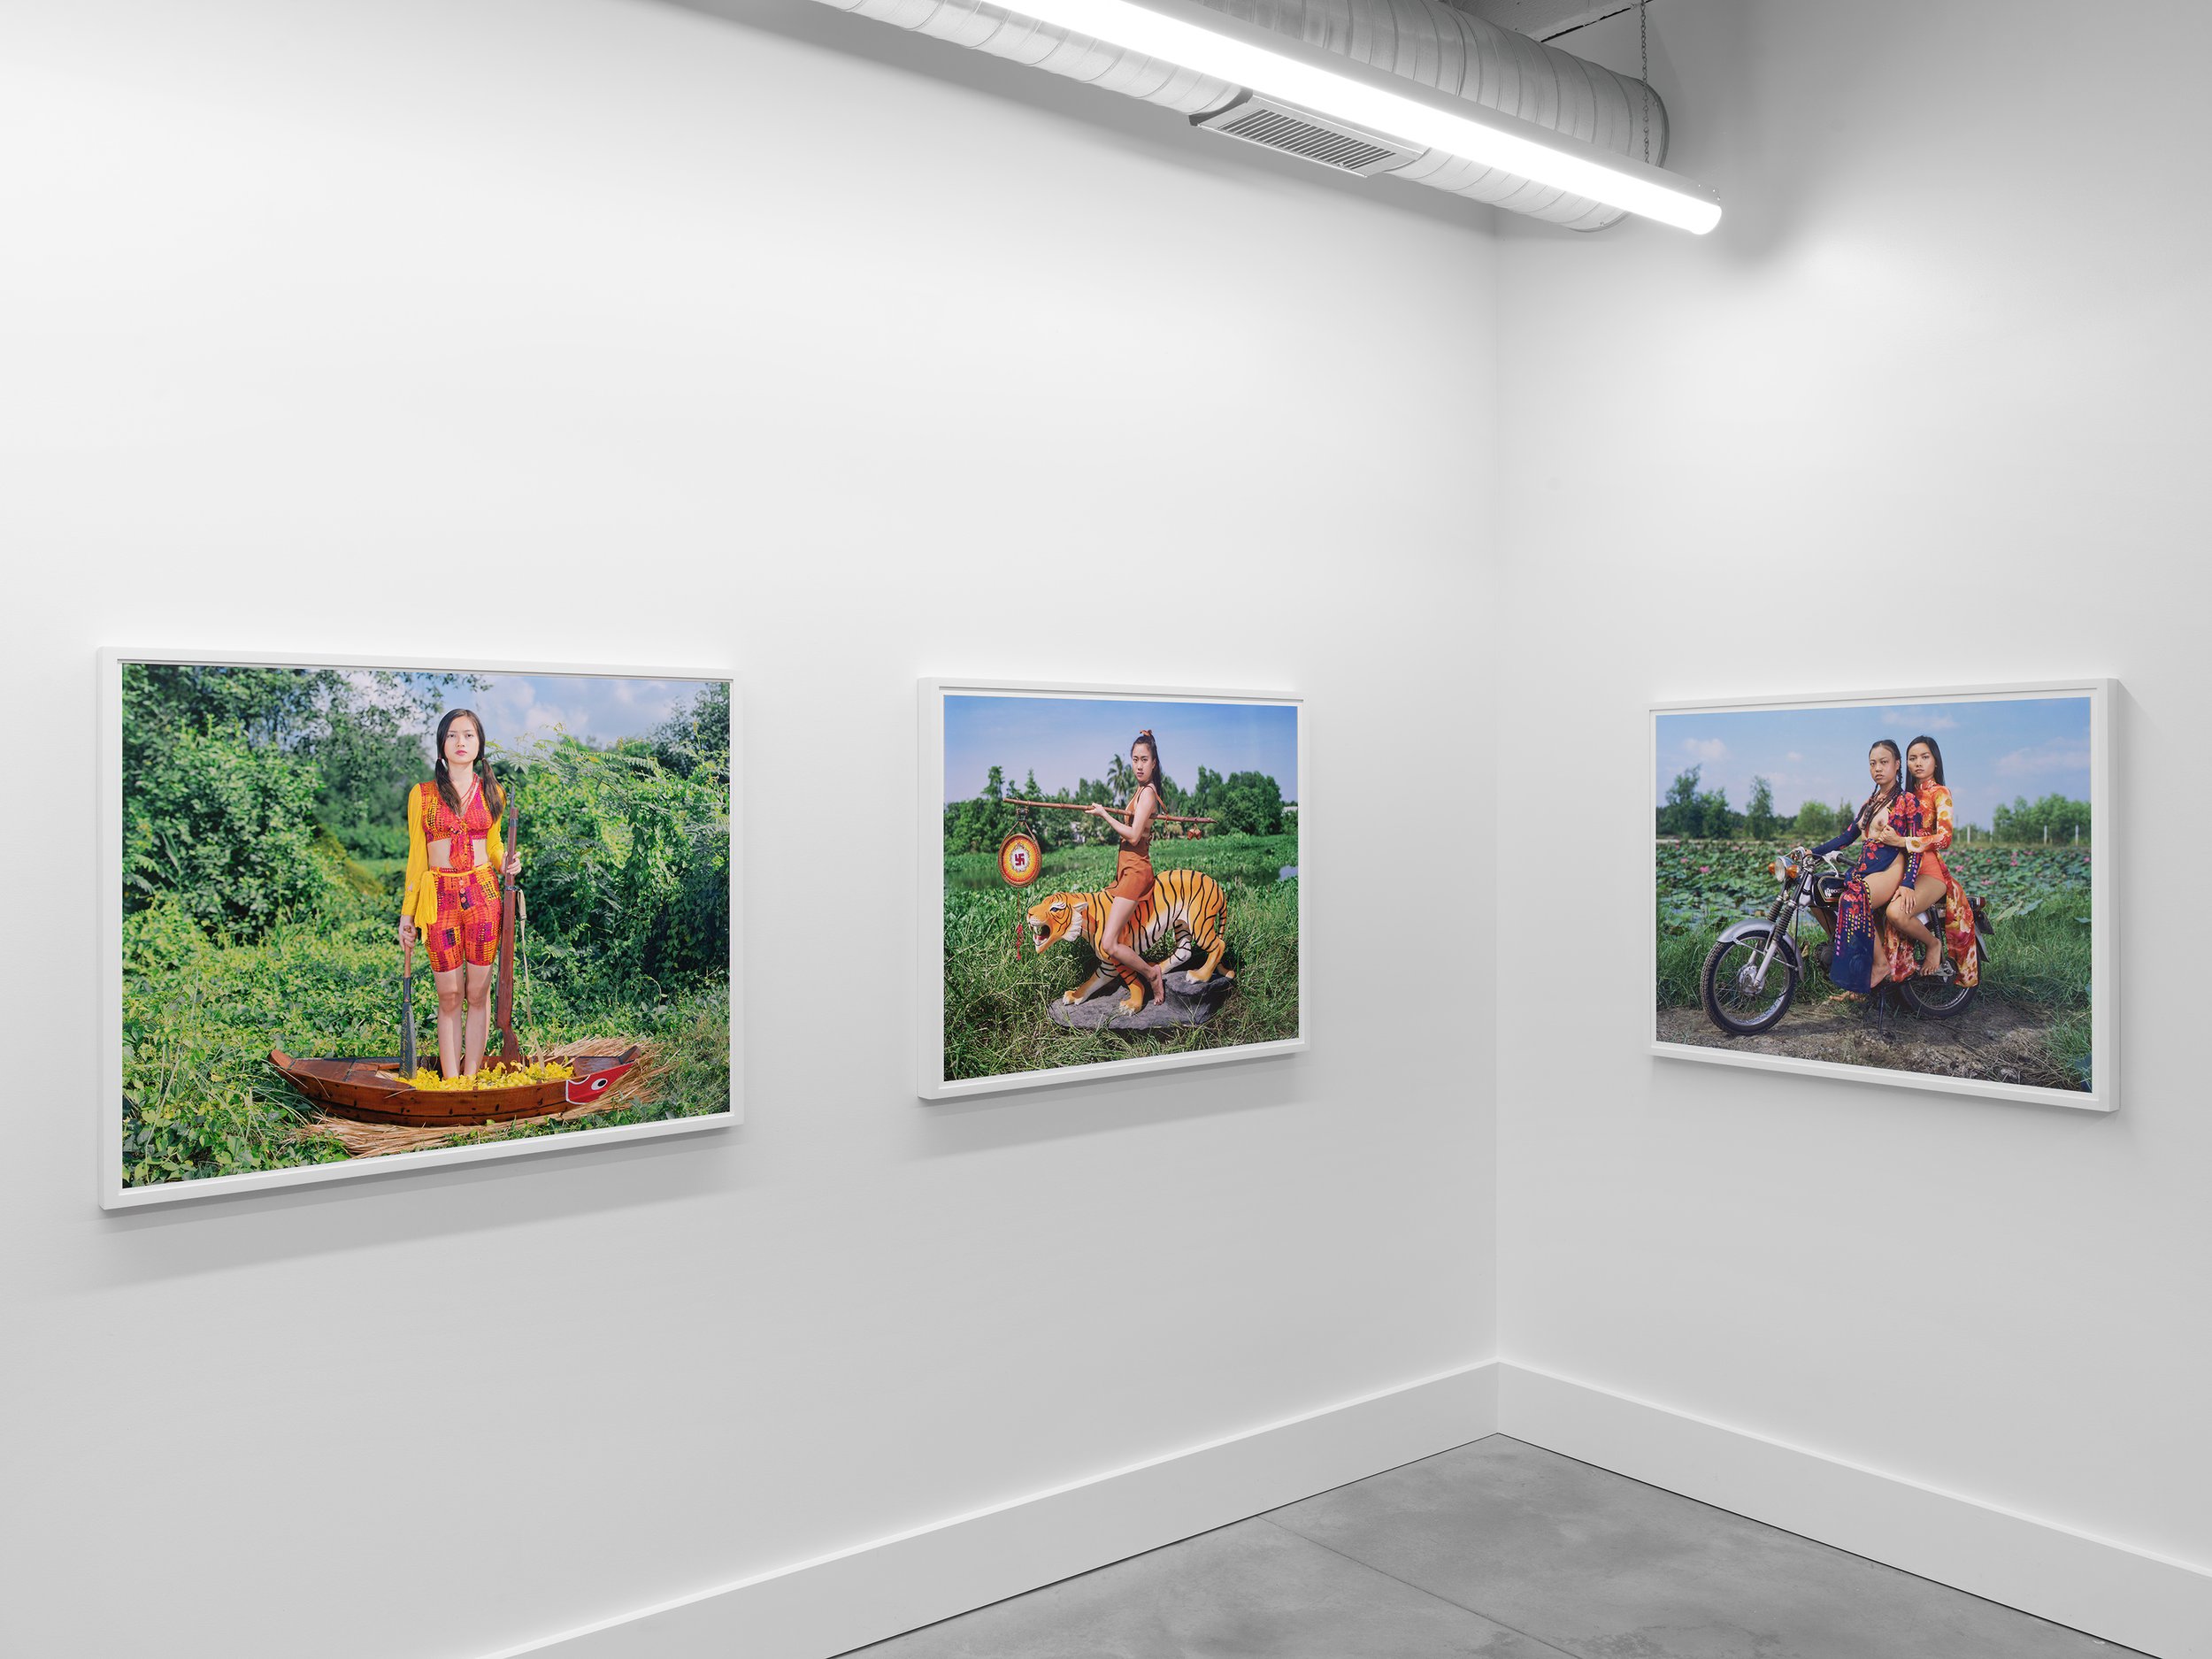  Installation view of Olivier Laude:   Chiến Thắng Ba Tơ left to right:  Sis{Quynh}-naut, Hổ Di, &amp; Pro Bono Publico II,  